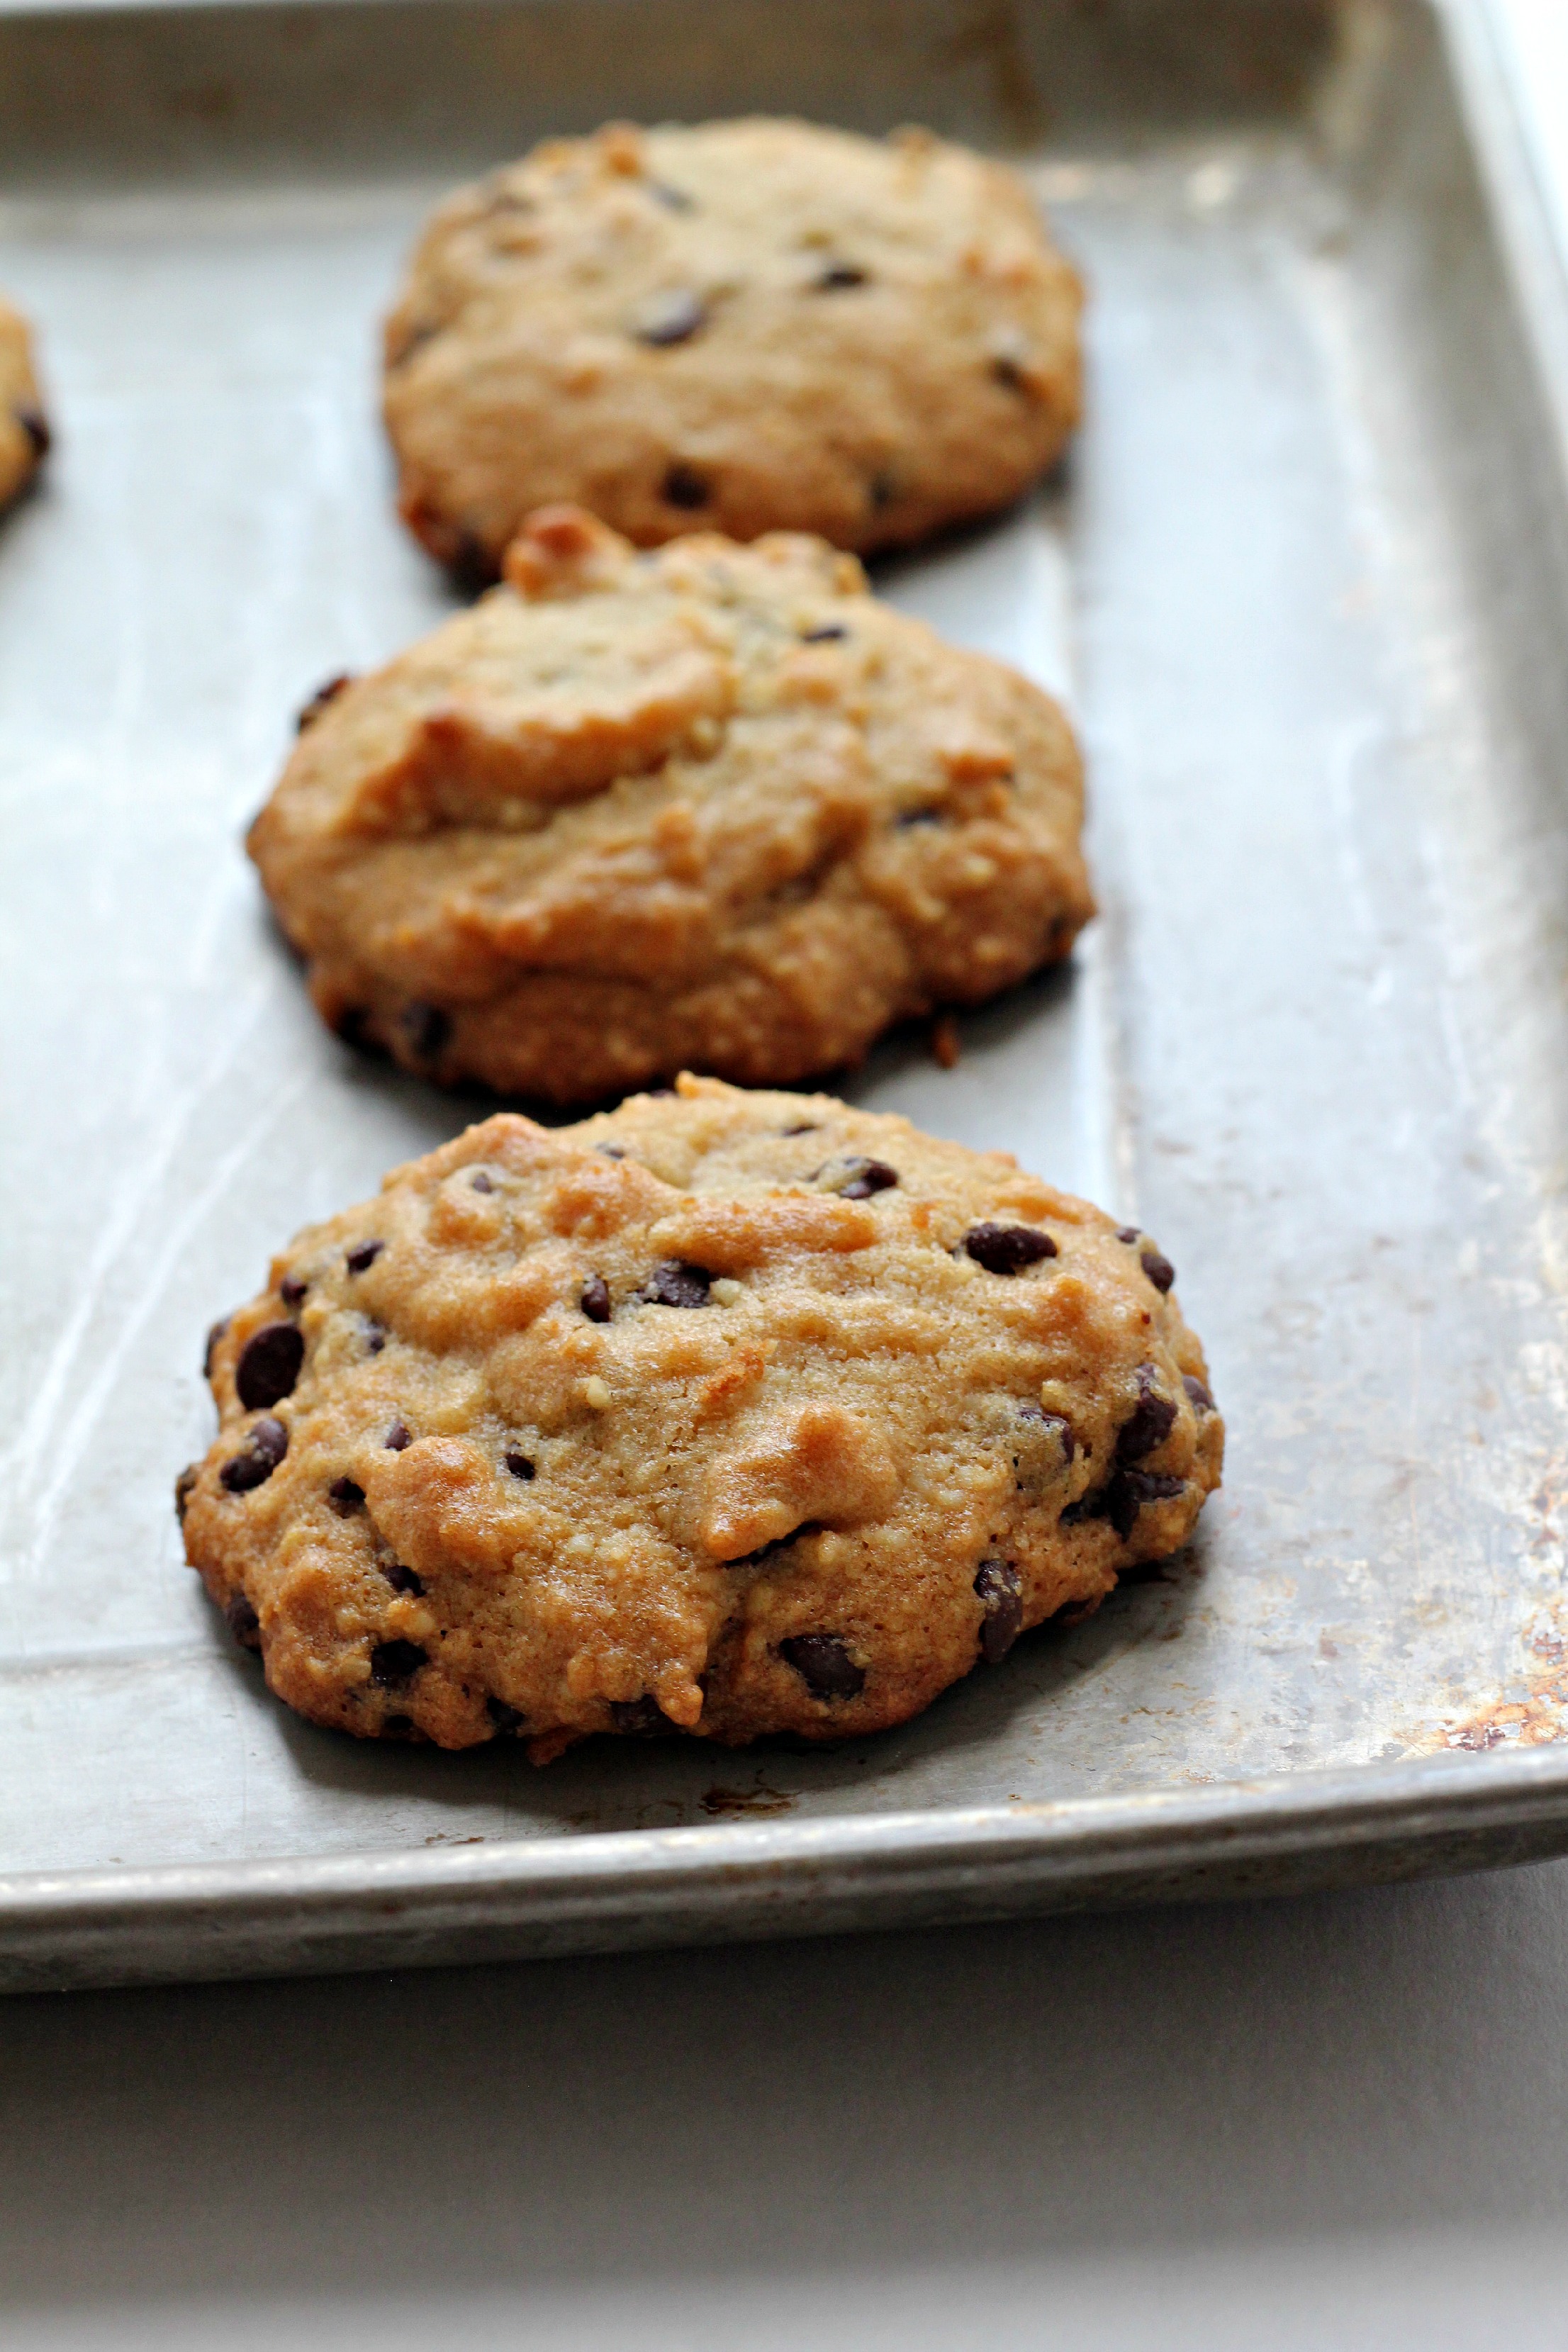 These are REAL deal Paleo Chocolate Chip Cookies. They taste just like the real thing. Warning, you can't just have one. 